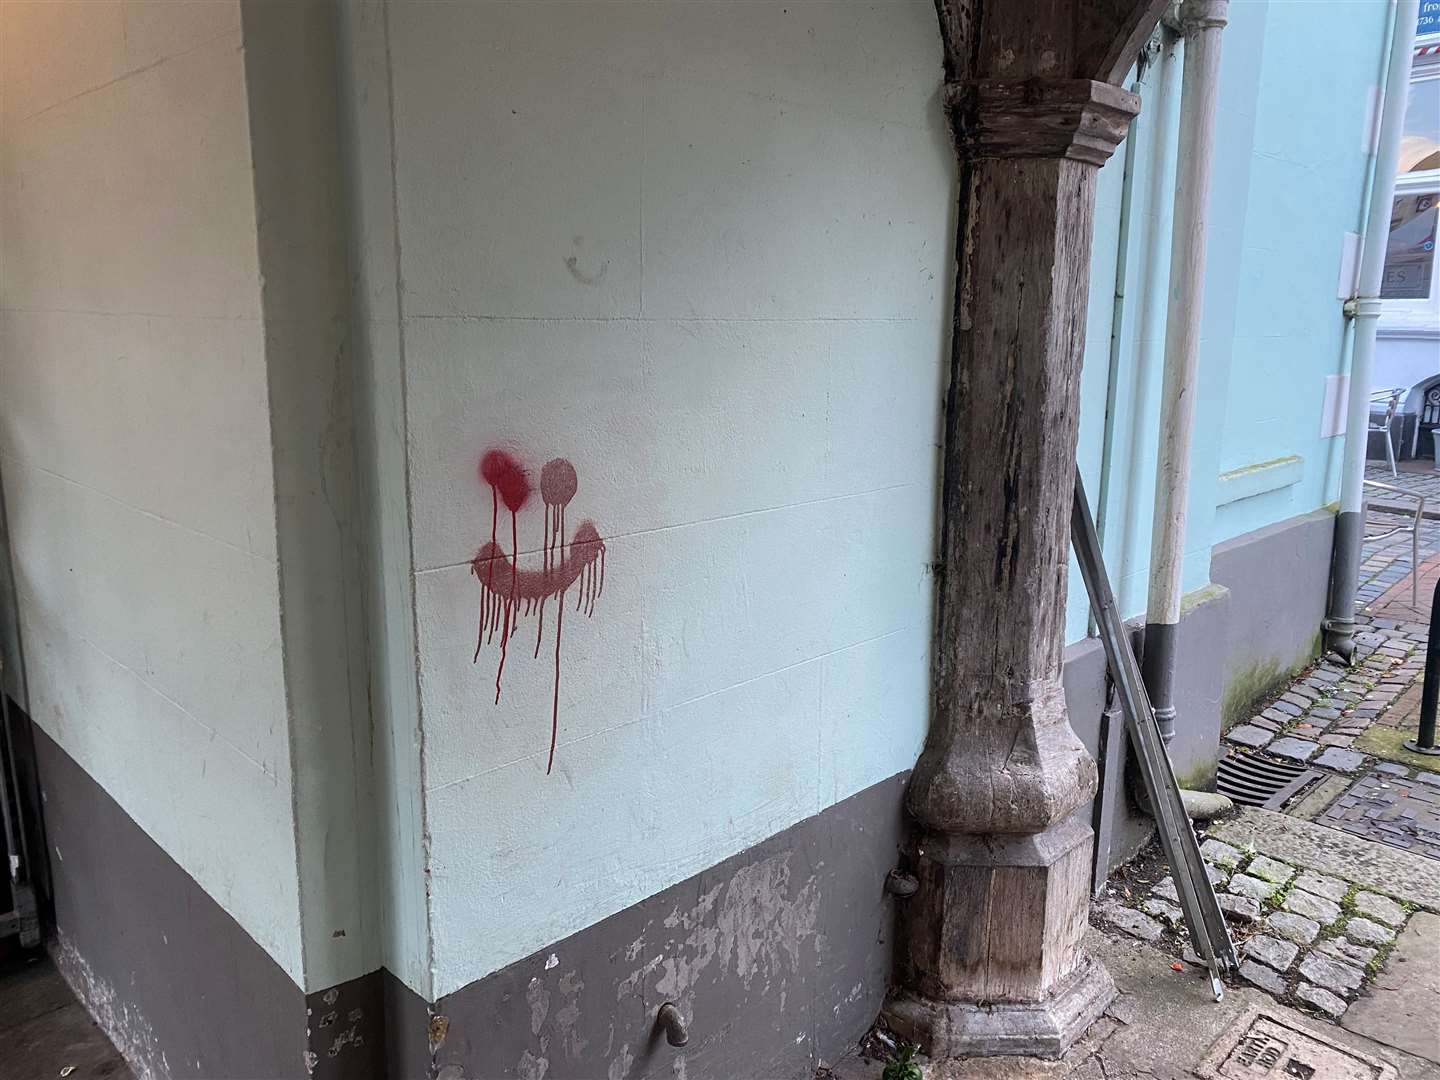 Even the Guildhall in Market Place, Faversham, has been targeted with graffiti